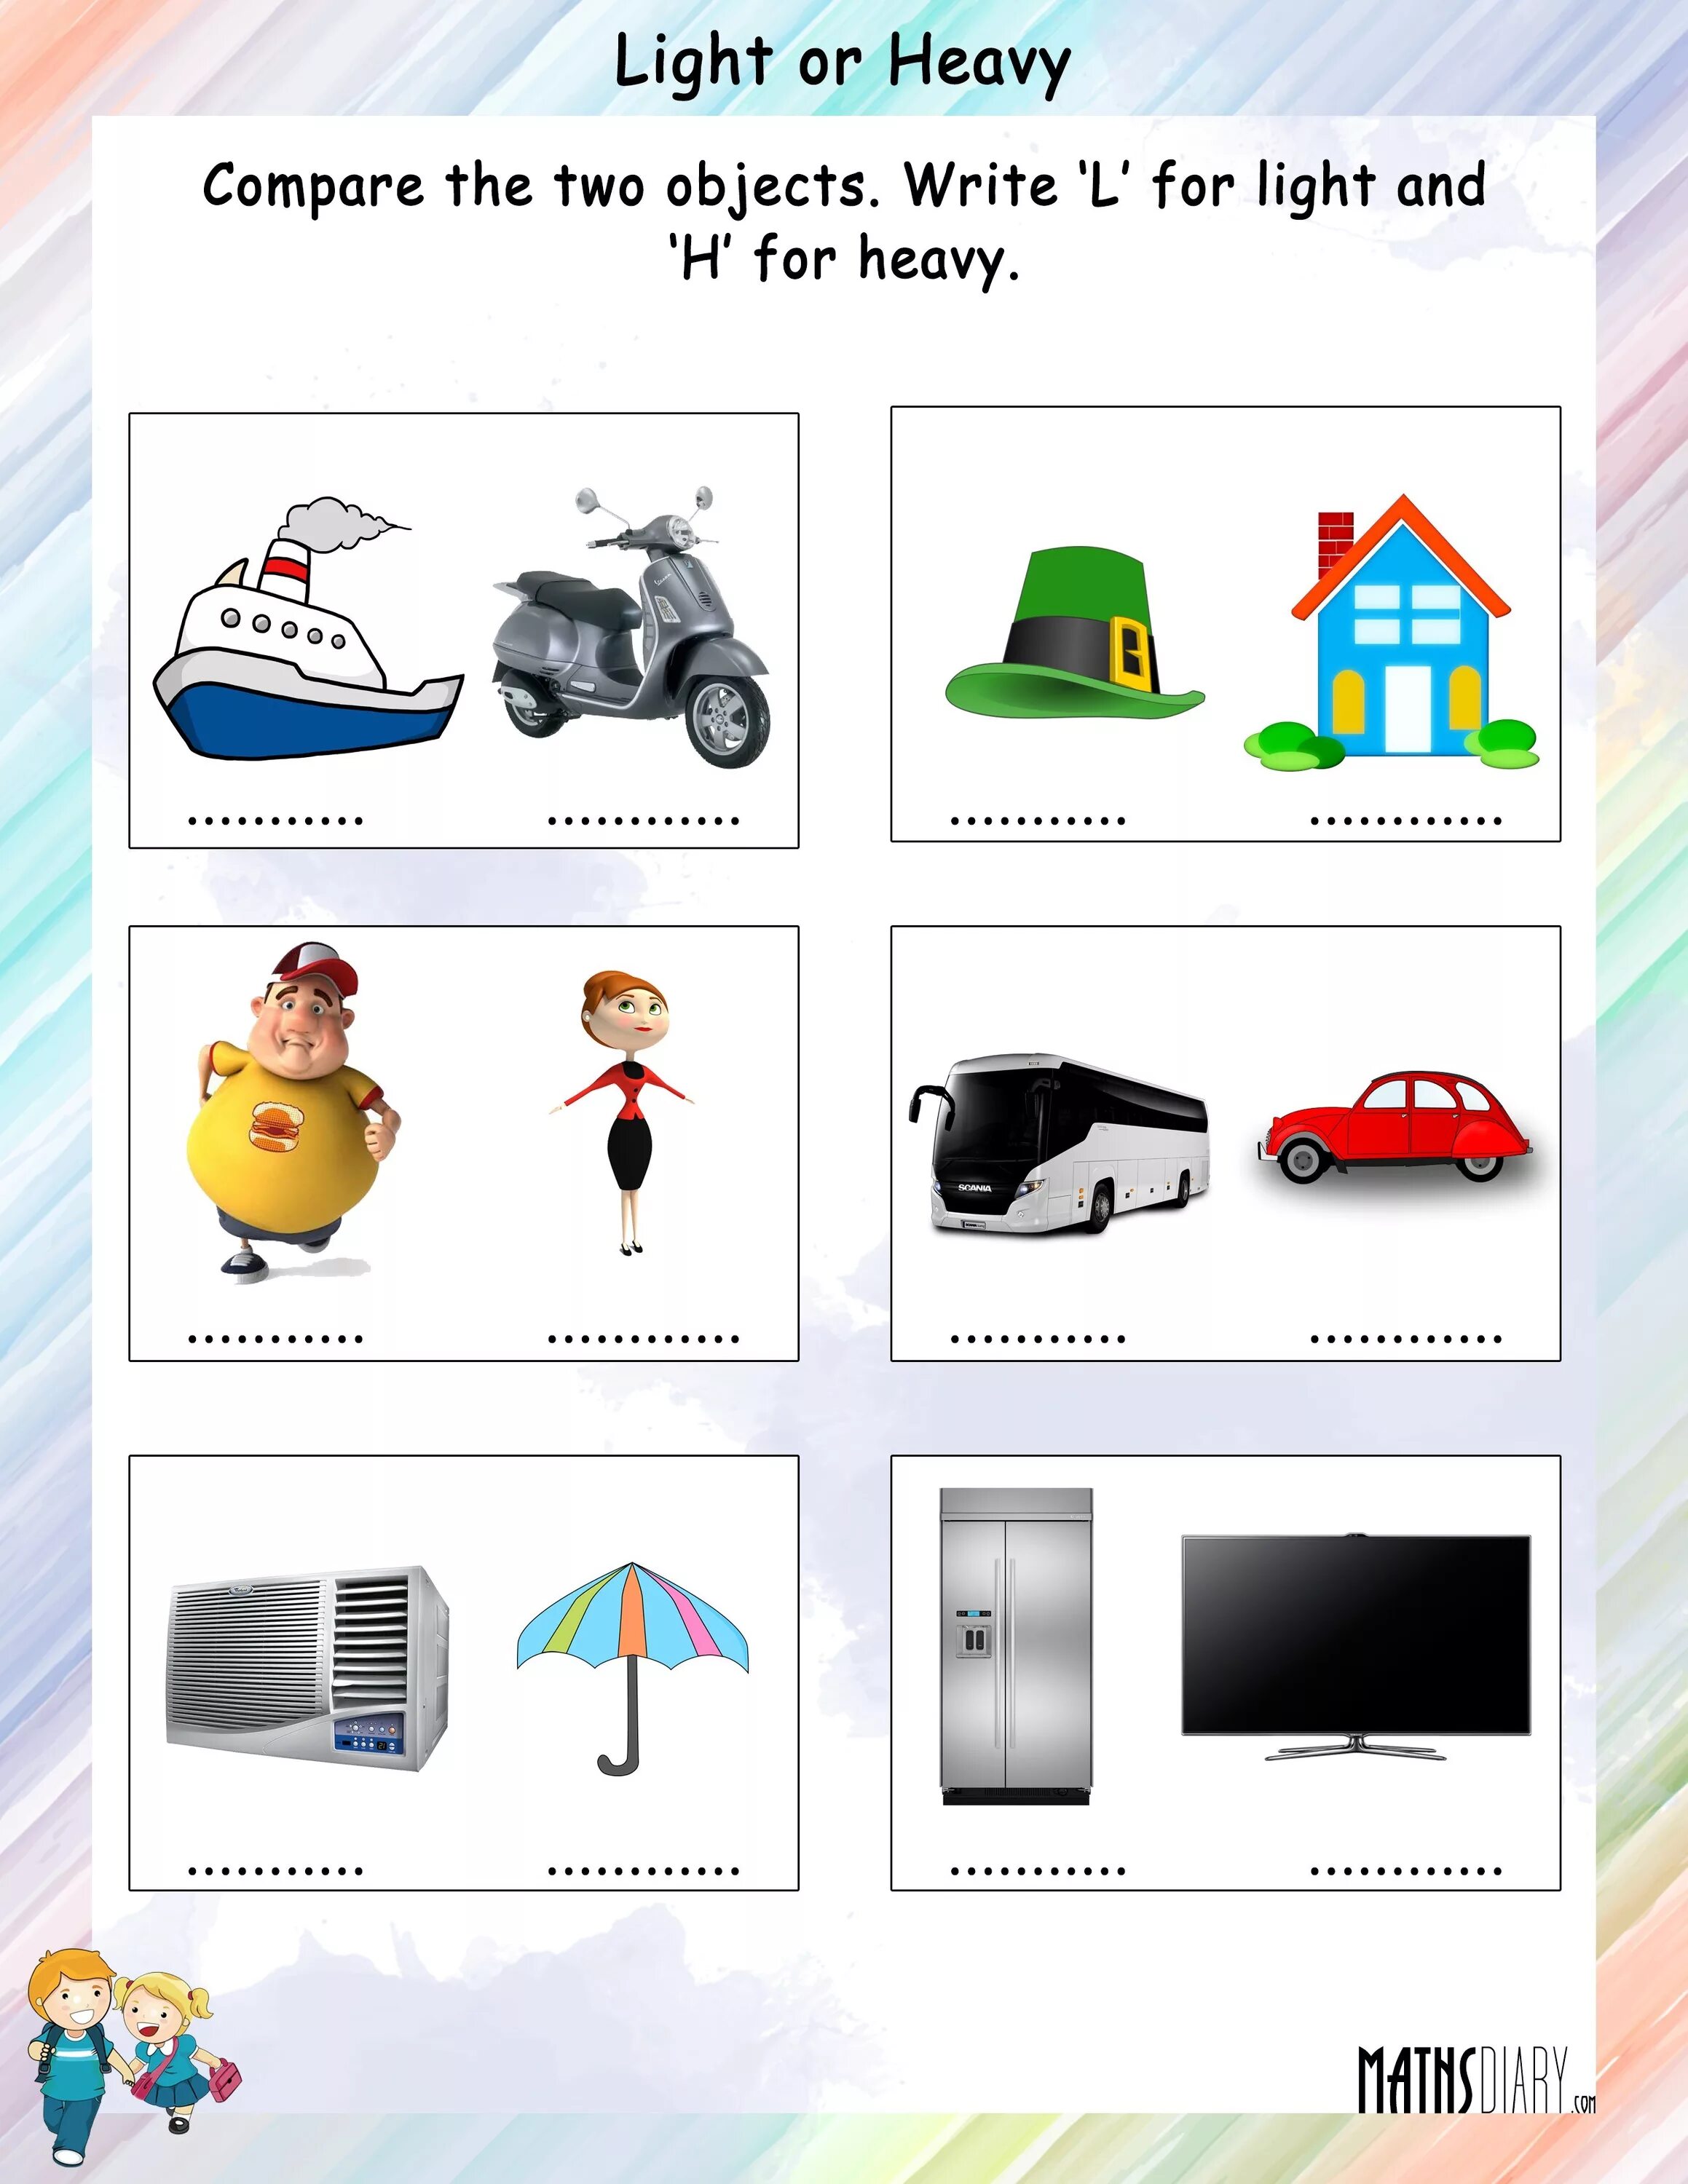 Heavy Light Worksheets. Compare objects. Compare the objects Worksheets. Objects to compare. Comparisons heavy